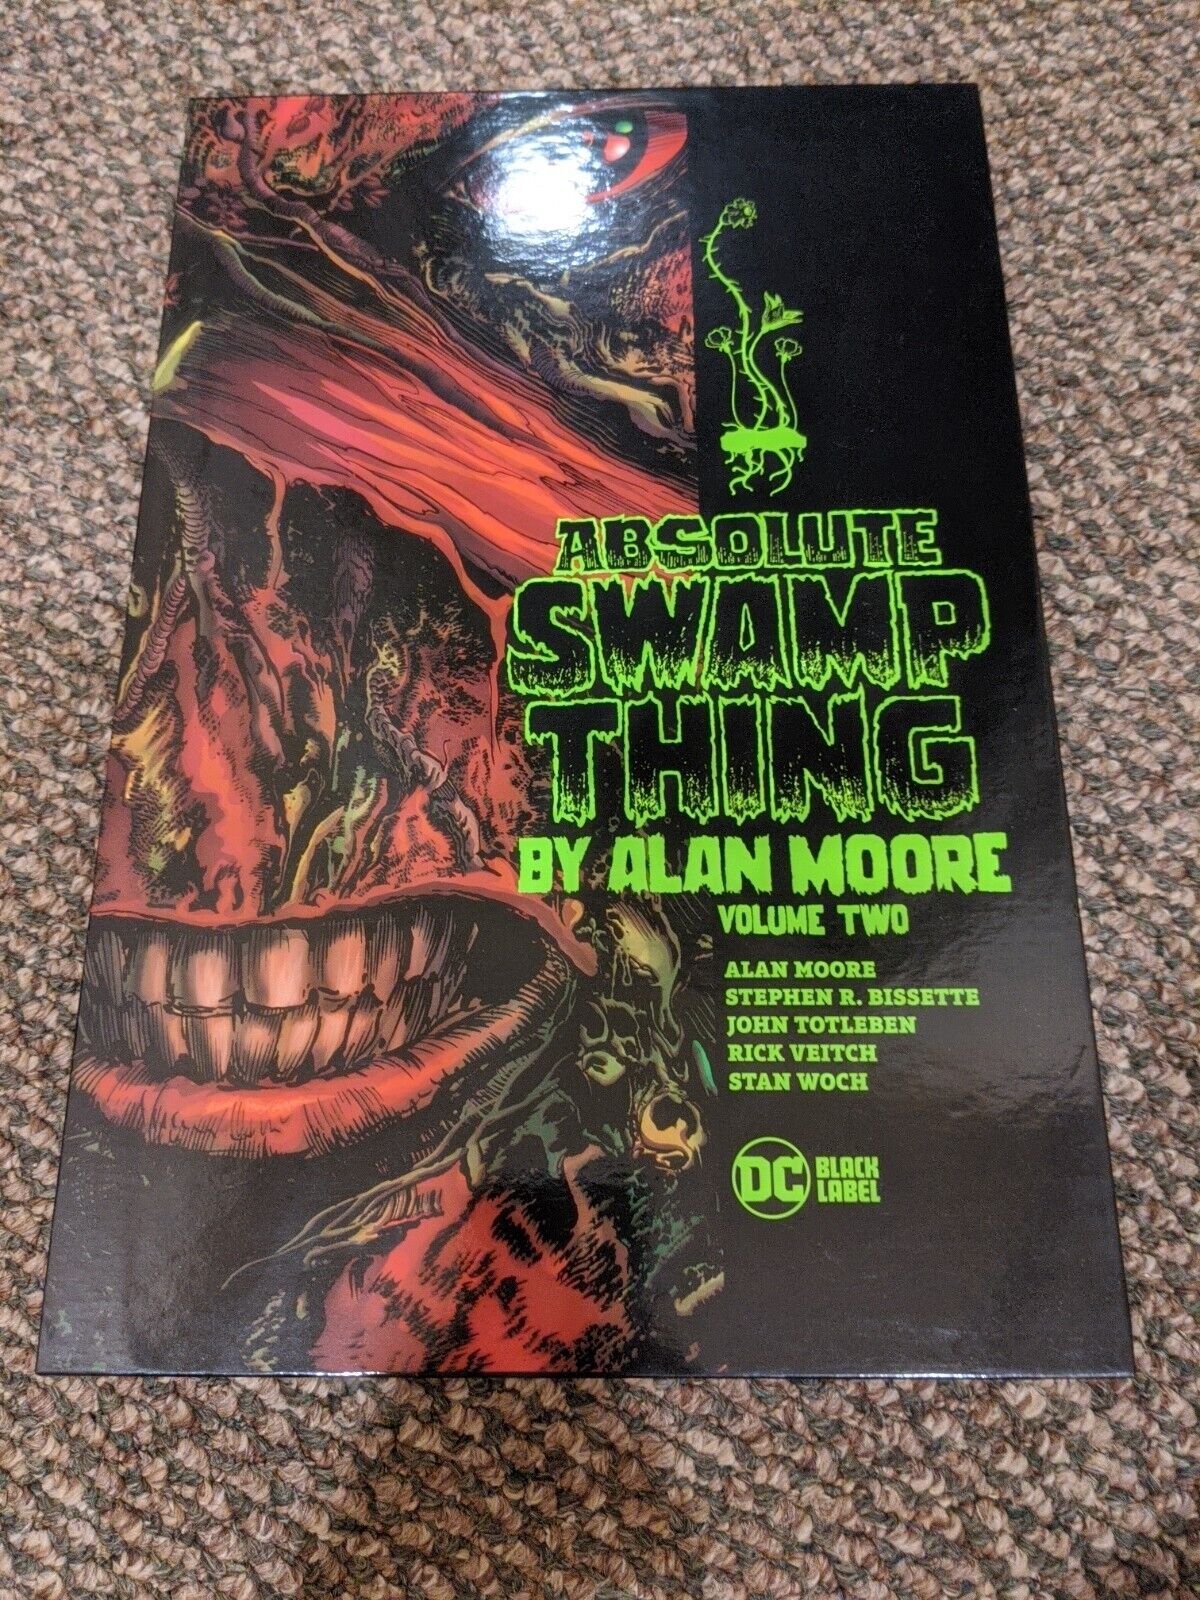 Absolute Swamp Thing by Alan Moore #2 (DC Comics, December 2020)